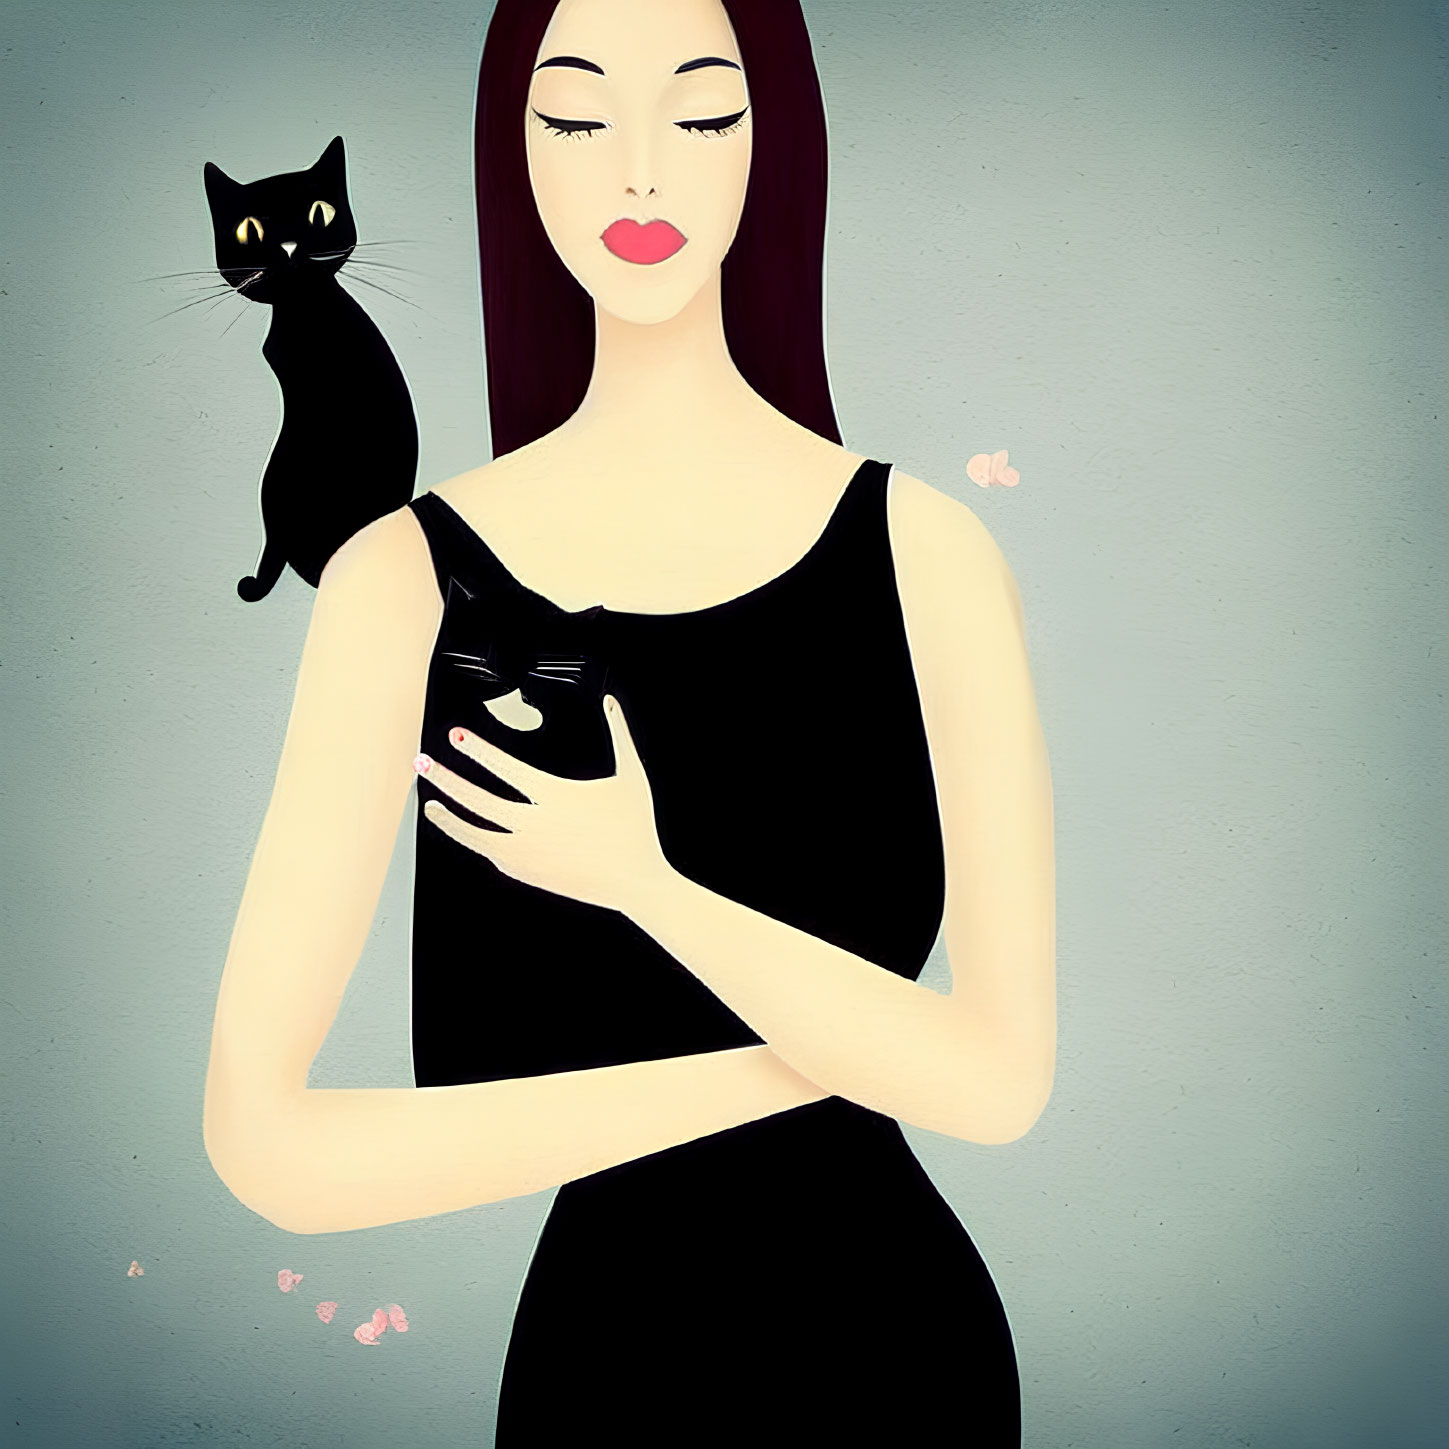 Illustrated woman in black dress with black cat and pink butterflies on teal background